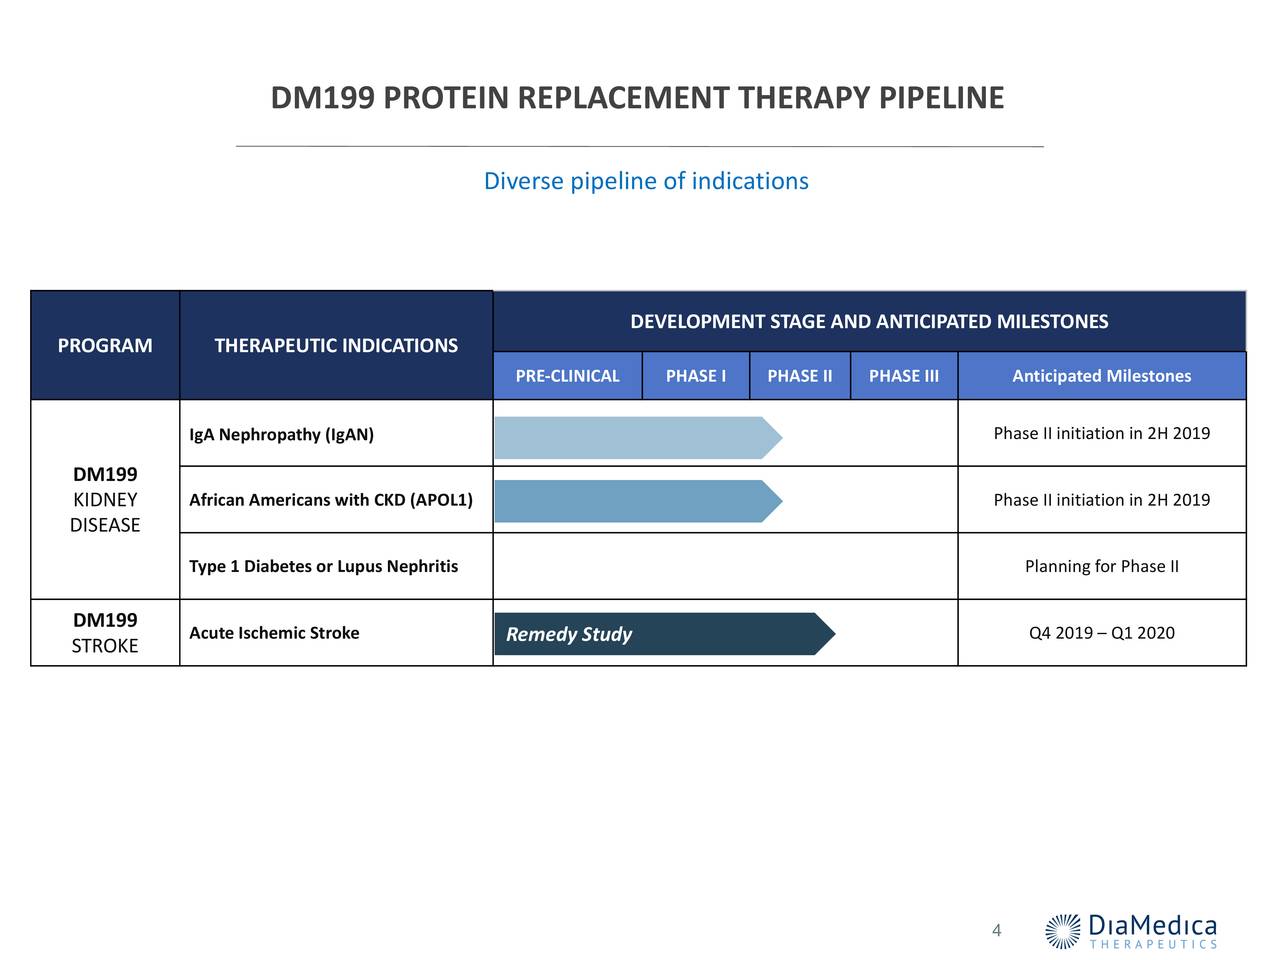 DM199 PROTEIN REPLACEMENT THERAPY PIPELINE